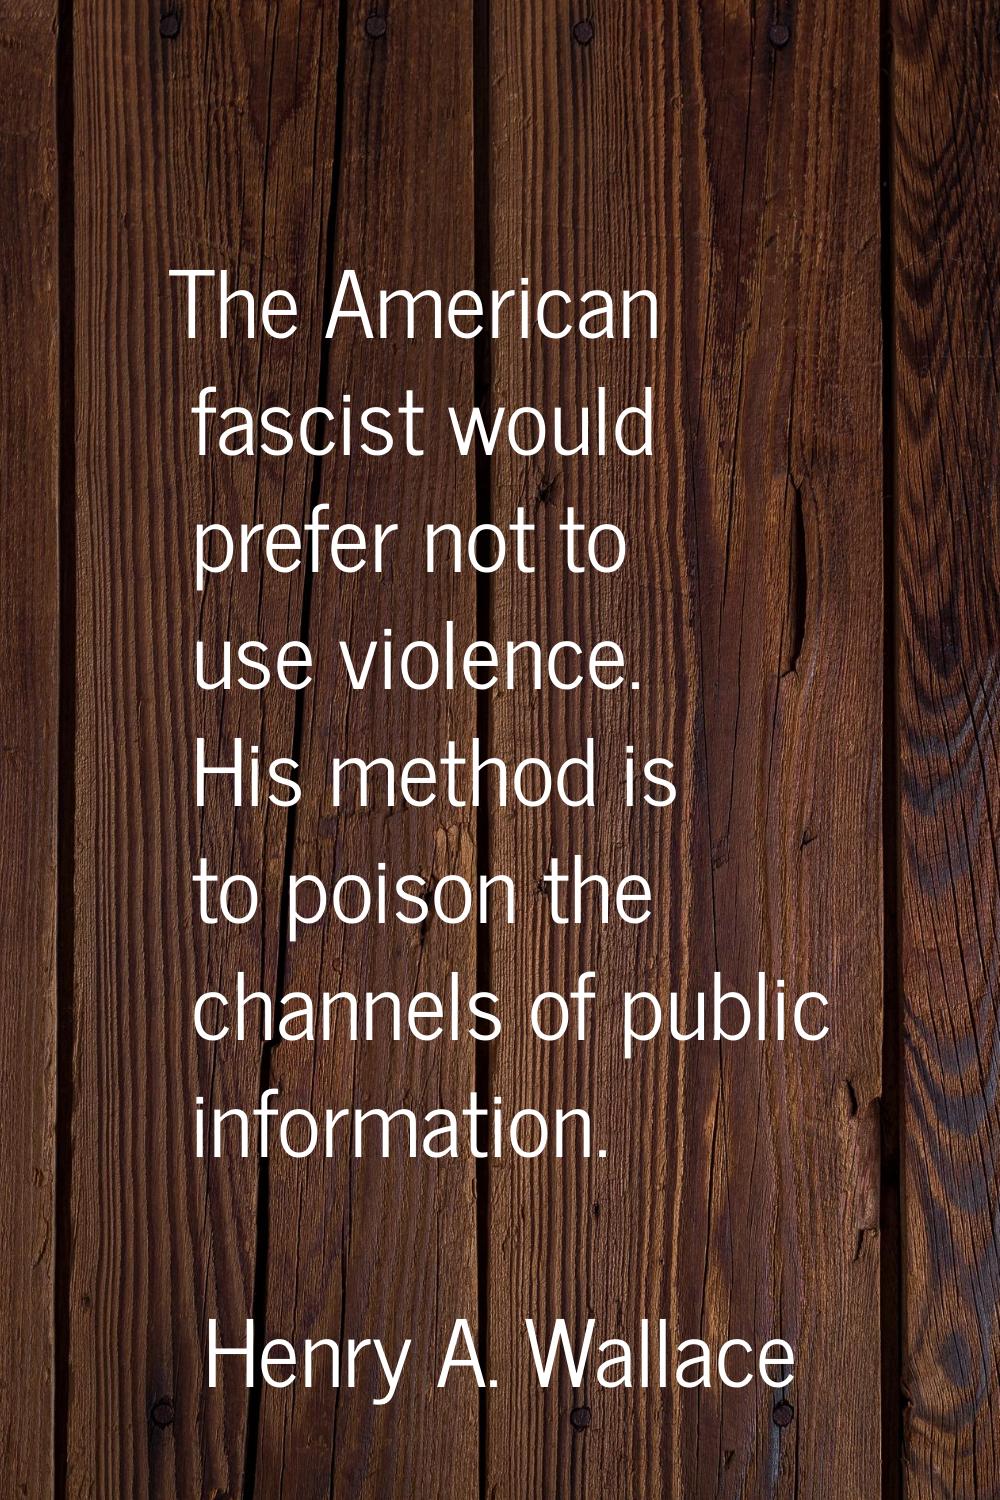 The American fascist would prefer not to use violence. His method is to poison the channels of publ